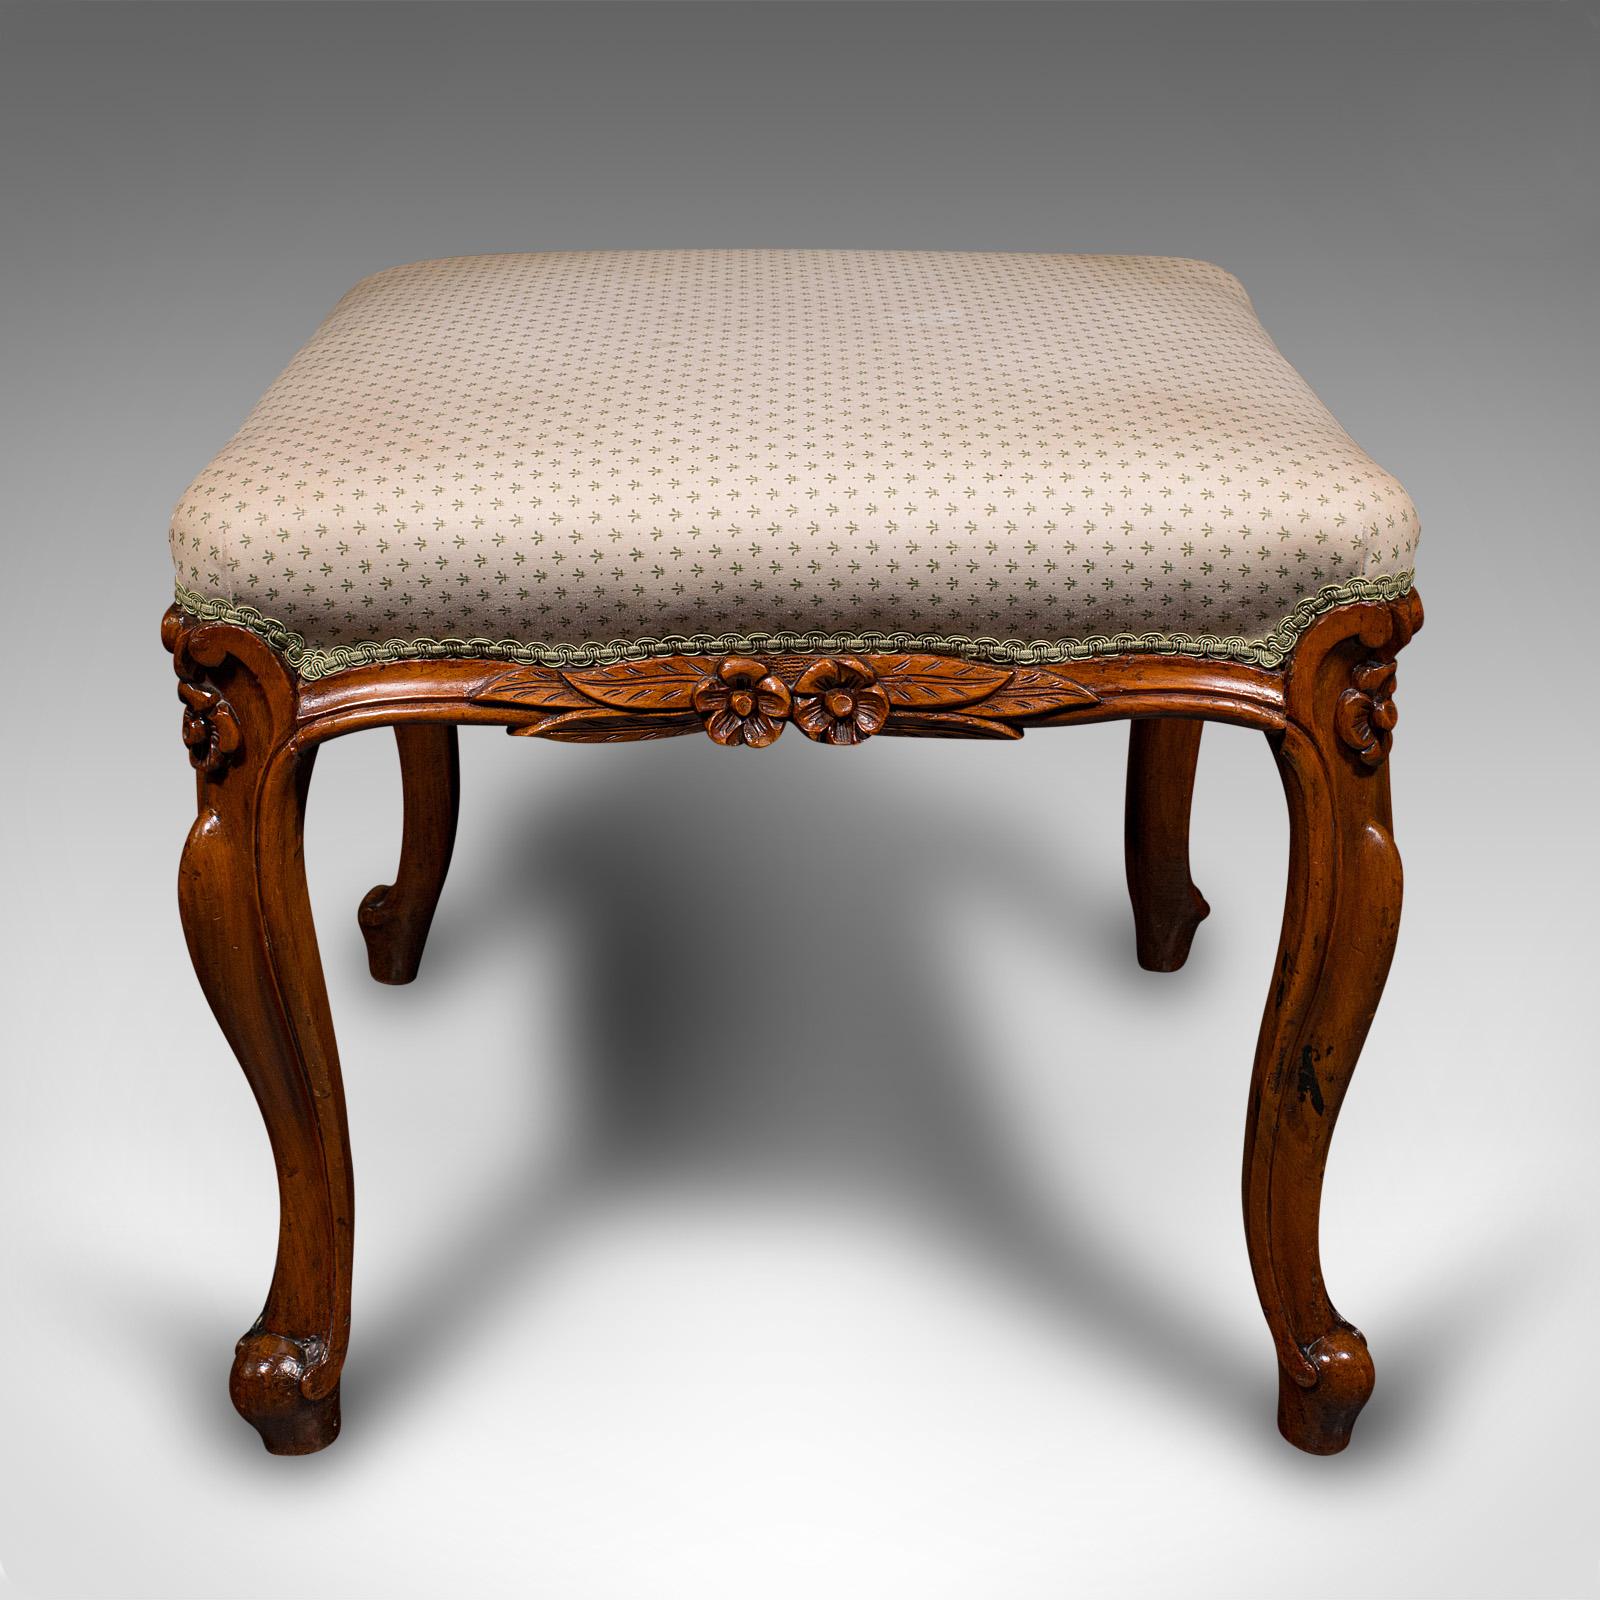 British Wide Antique Dressing Stool, English, Walnut Bedroom Seat, Early Victorian, 1840 For Sale